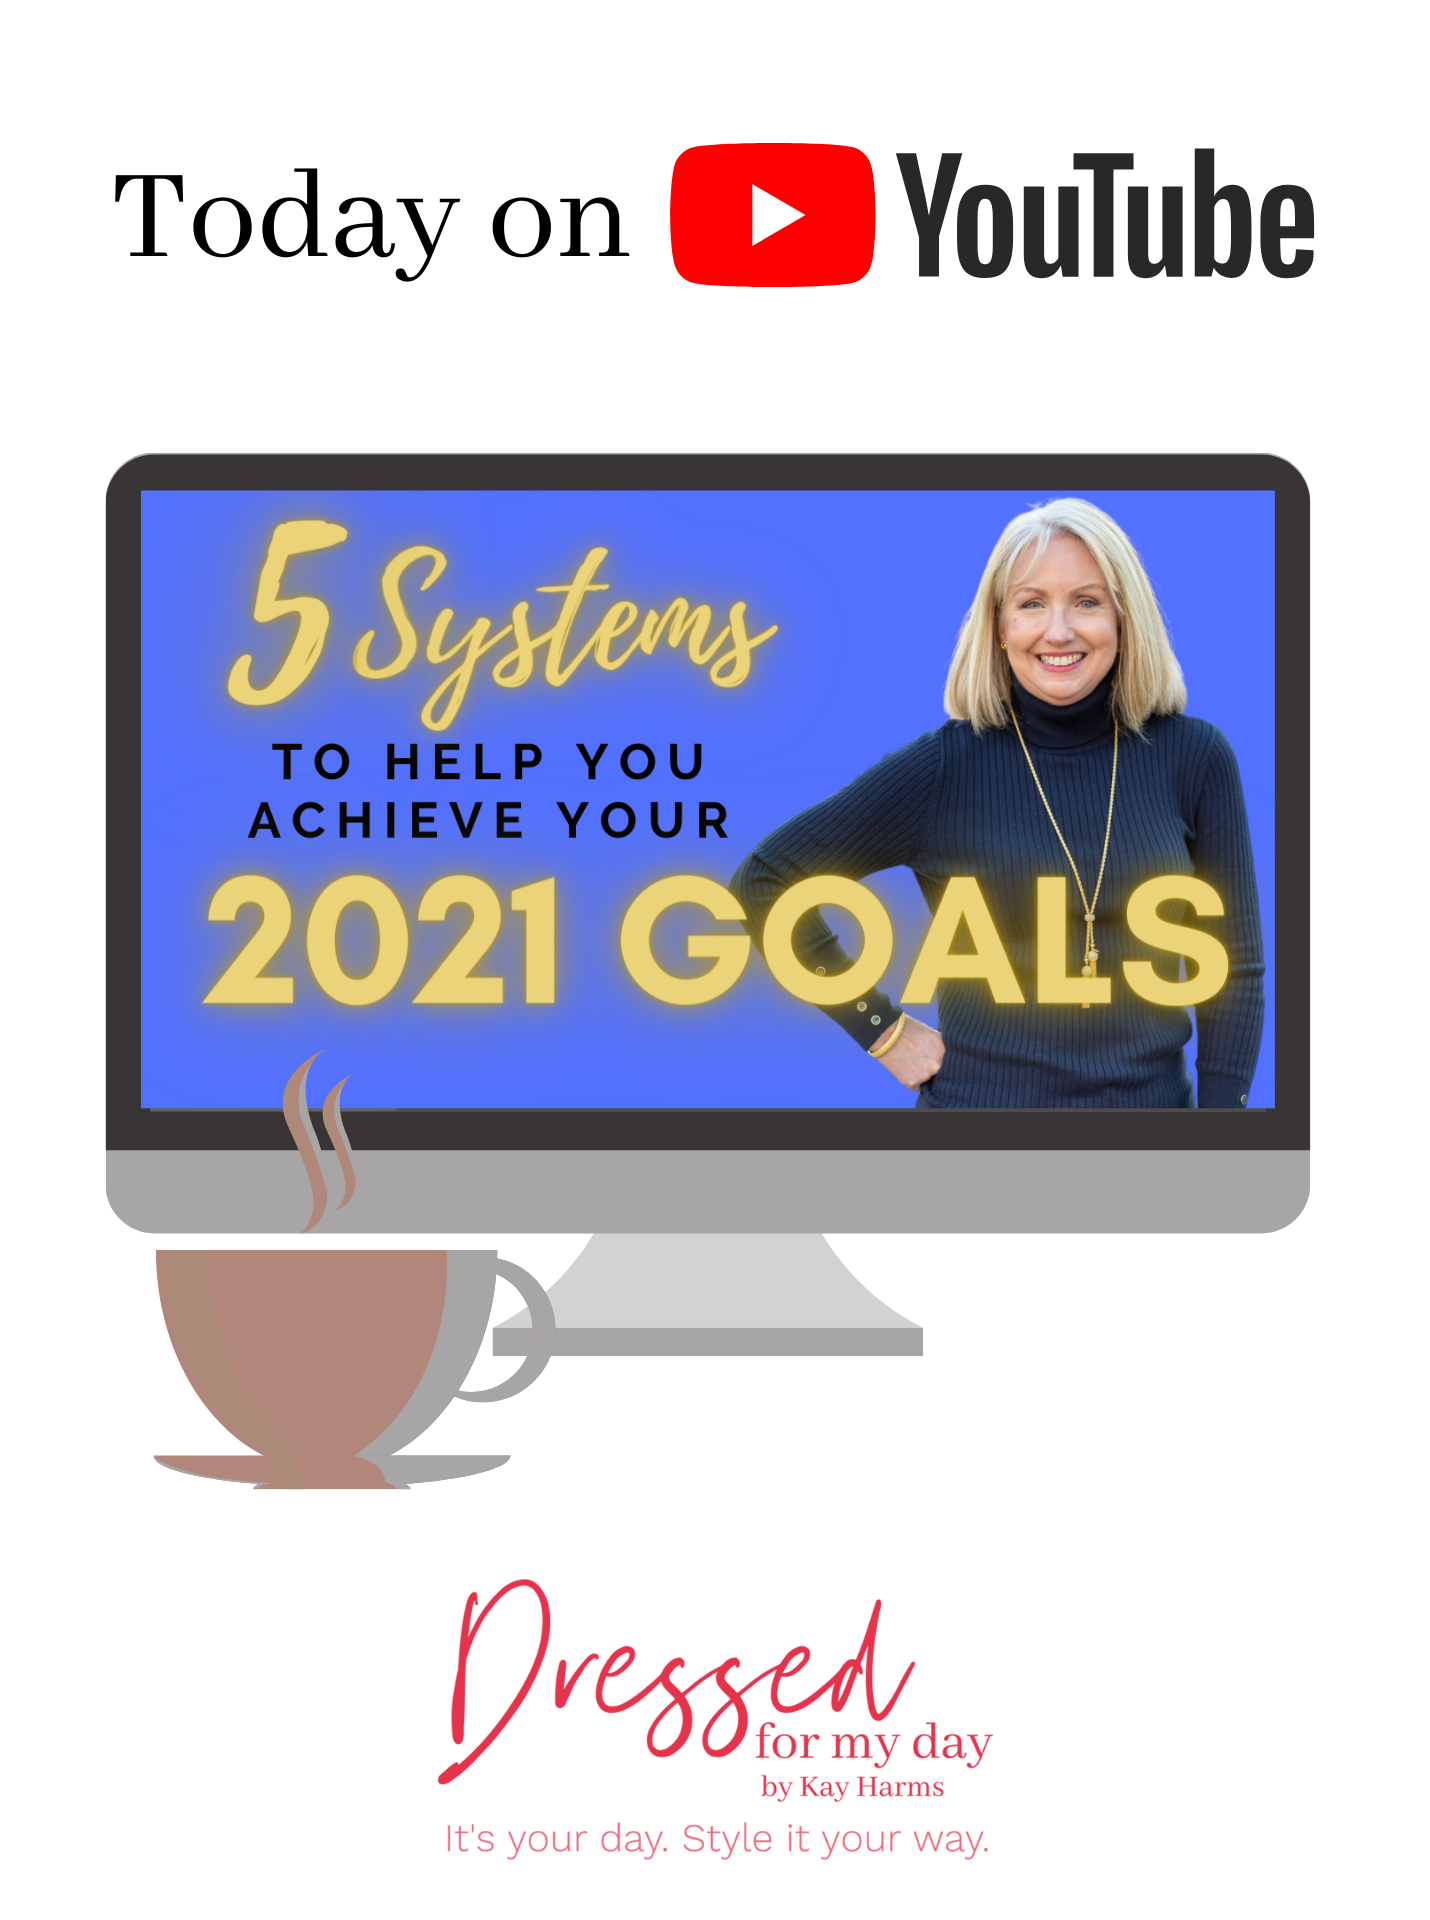 5 Systems to Help You Achieve Your 2021 Goals blog post